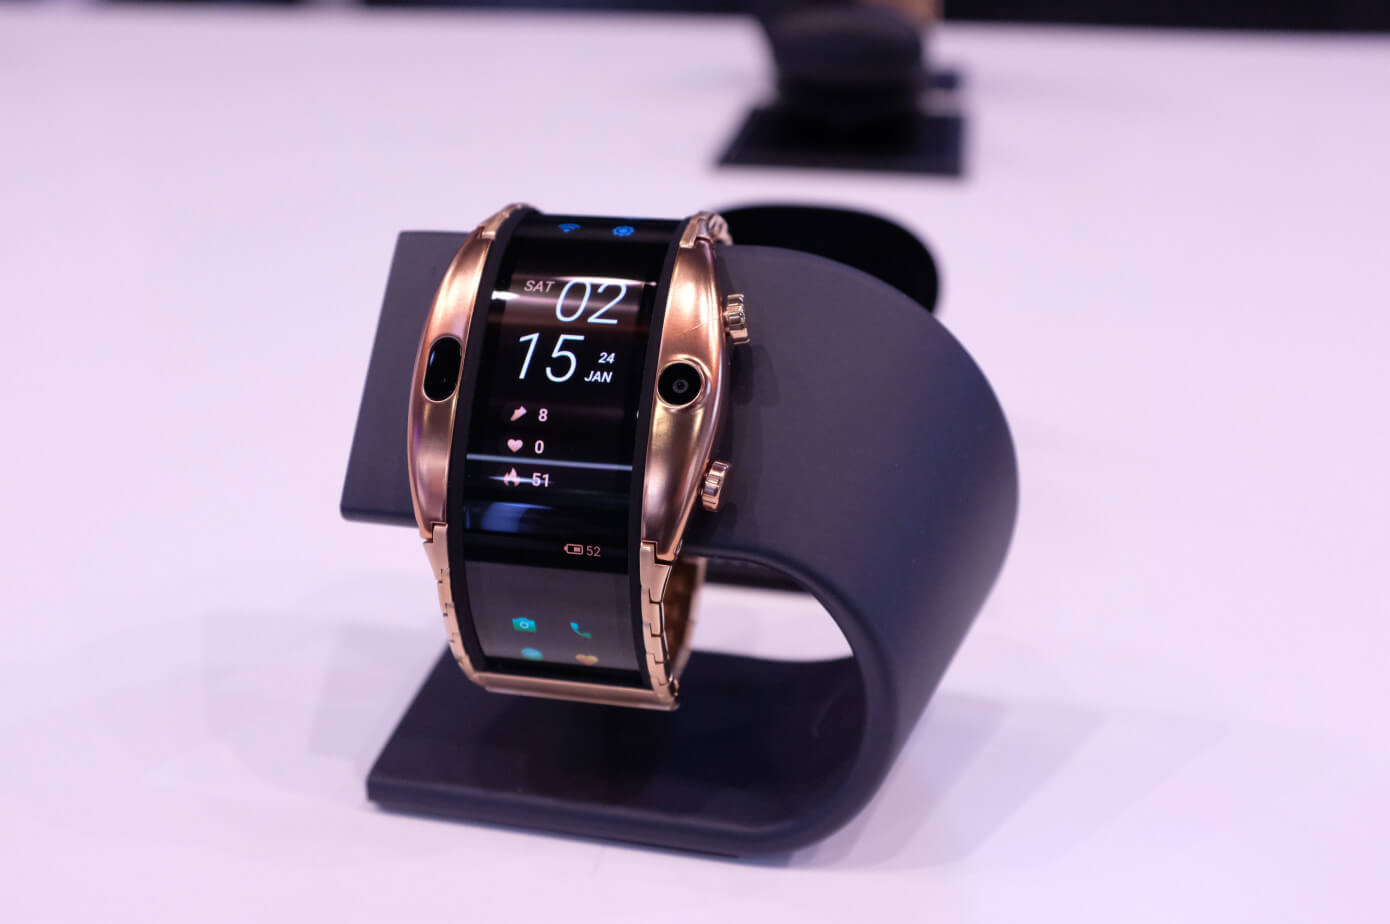 Nubia wearable smartphone at Mobile World Congress 2019